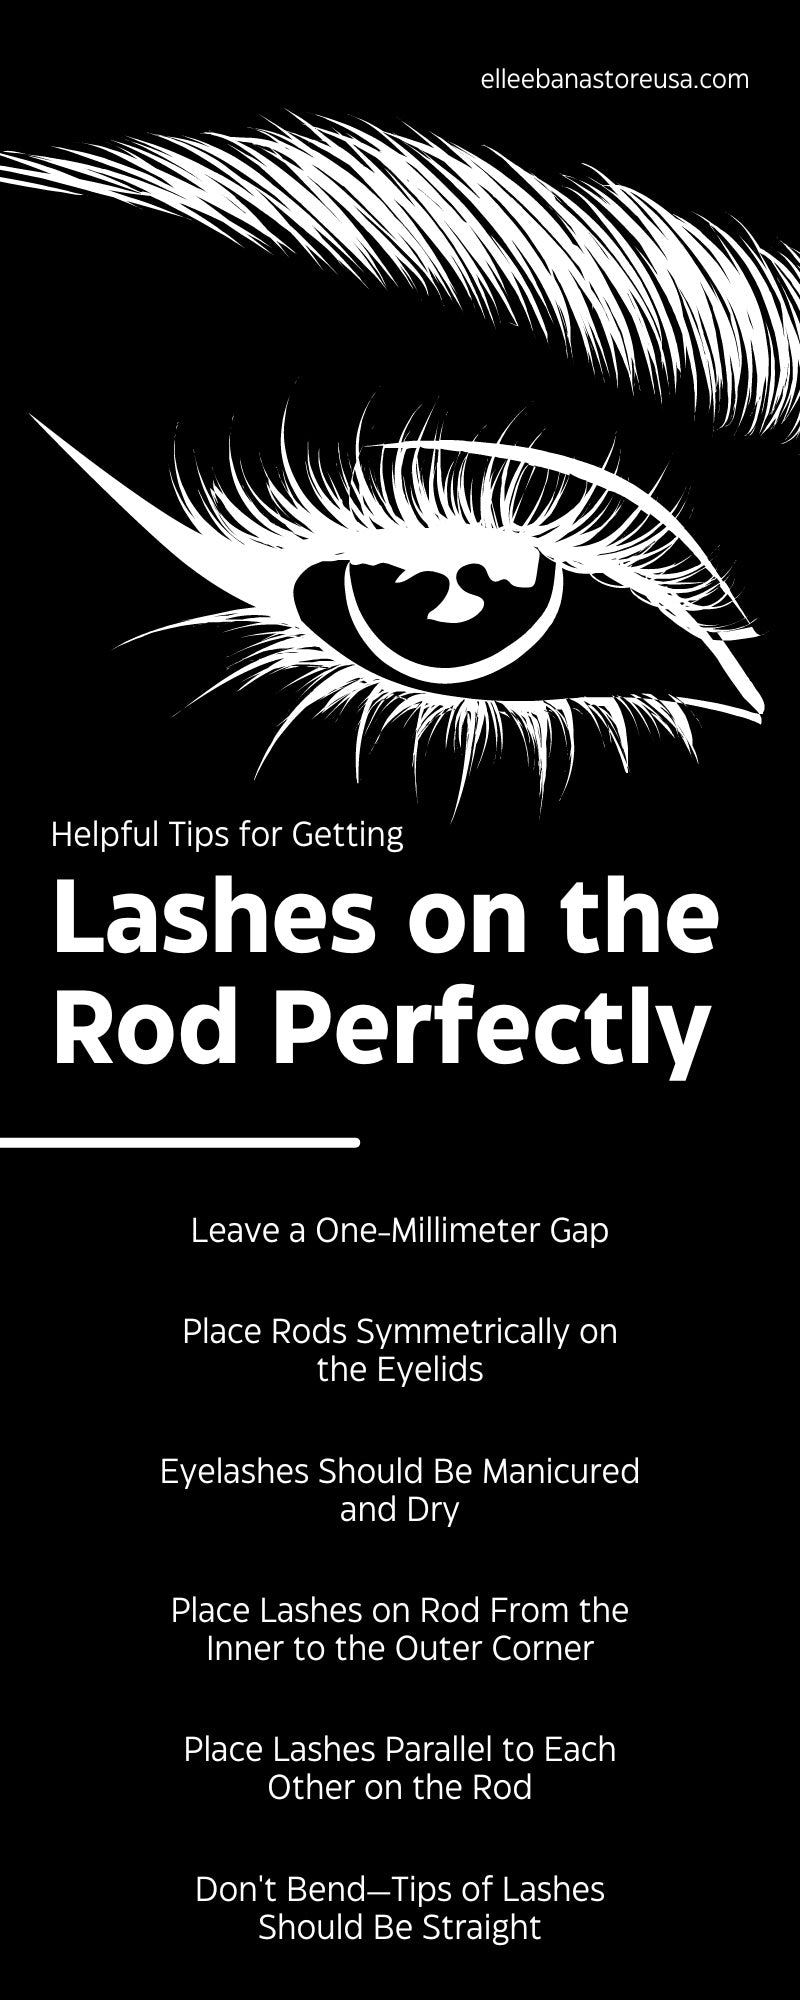 Helpful Tips for Getting Lashes on the Rod Perfectly